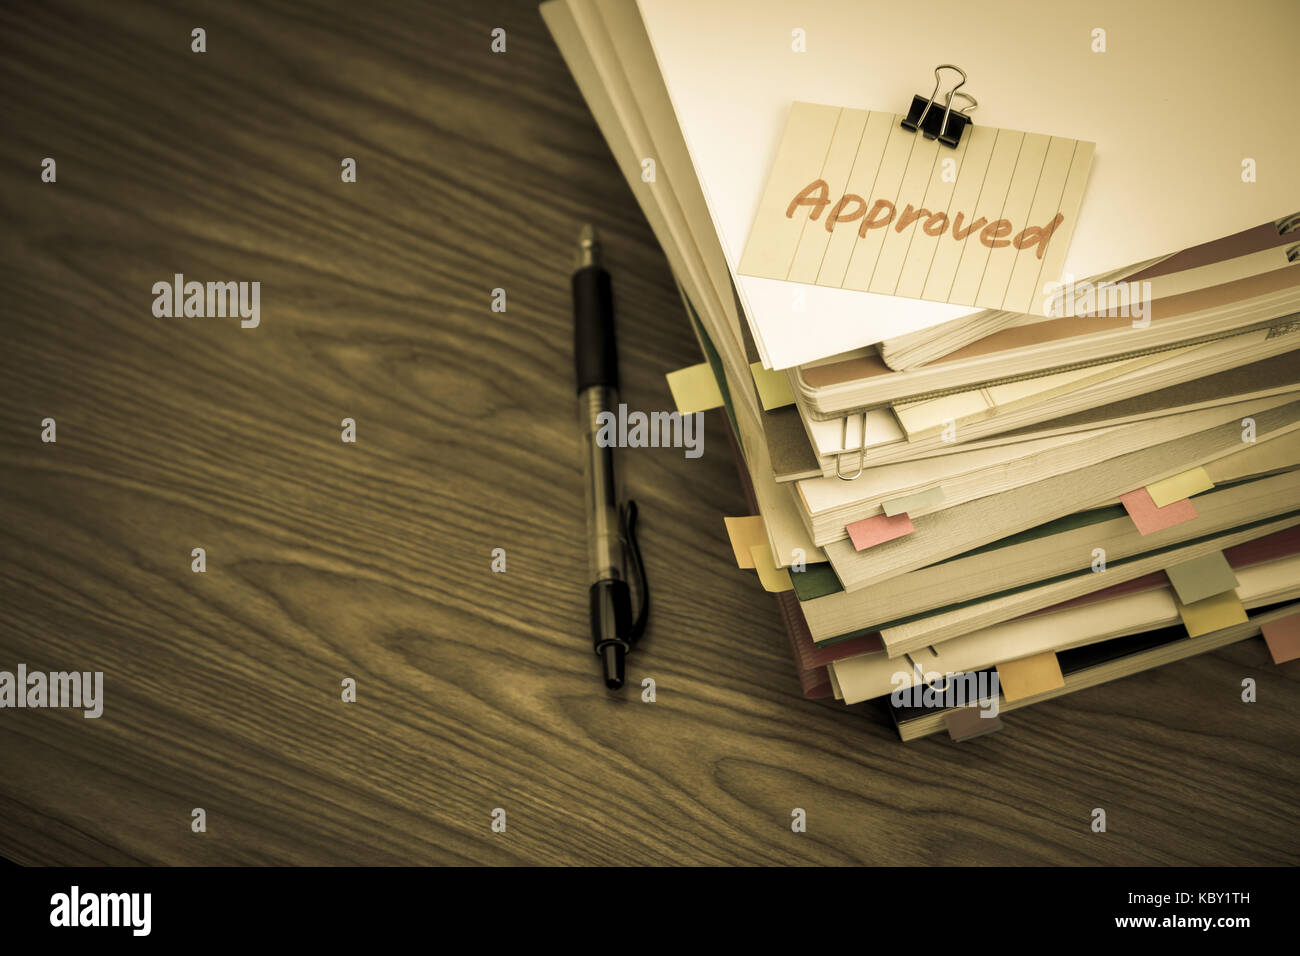 Approved; The Pile of Business Documents on the Desk Stock Photo